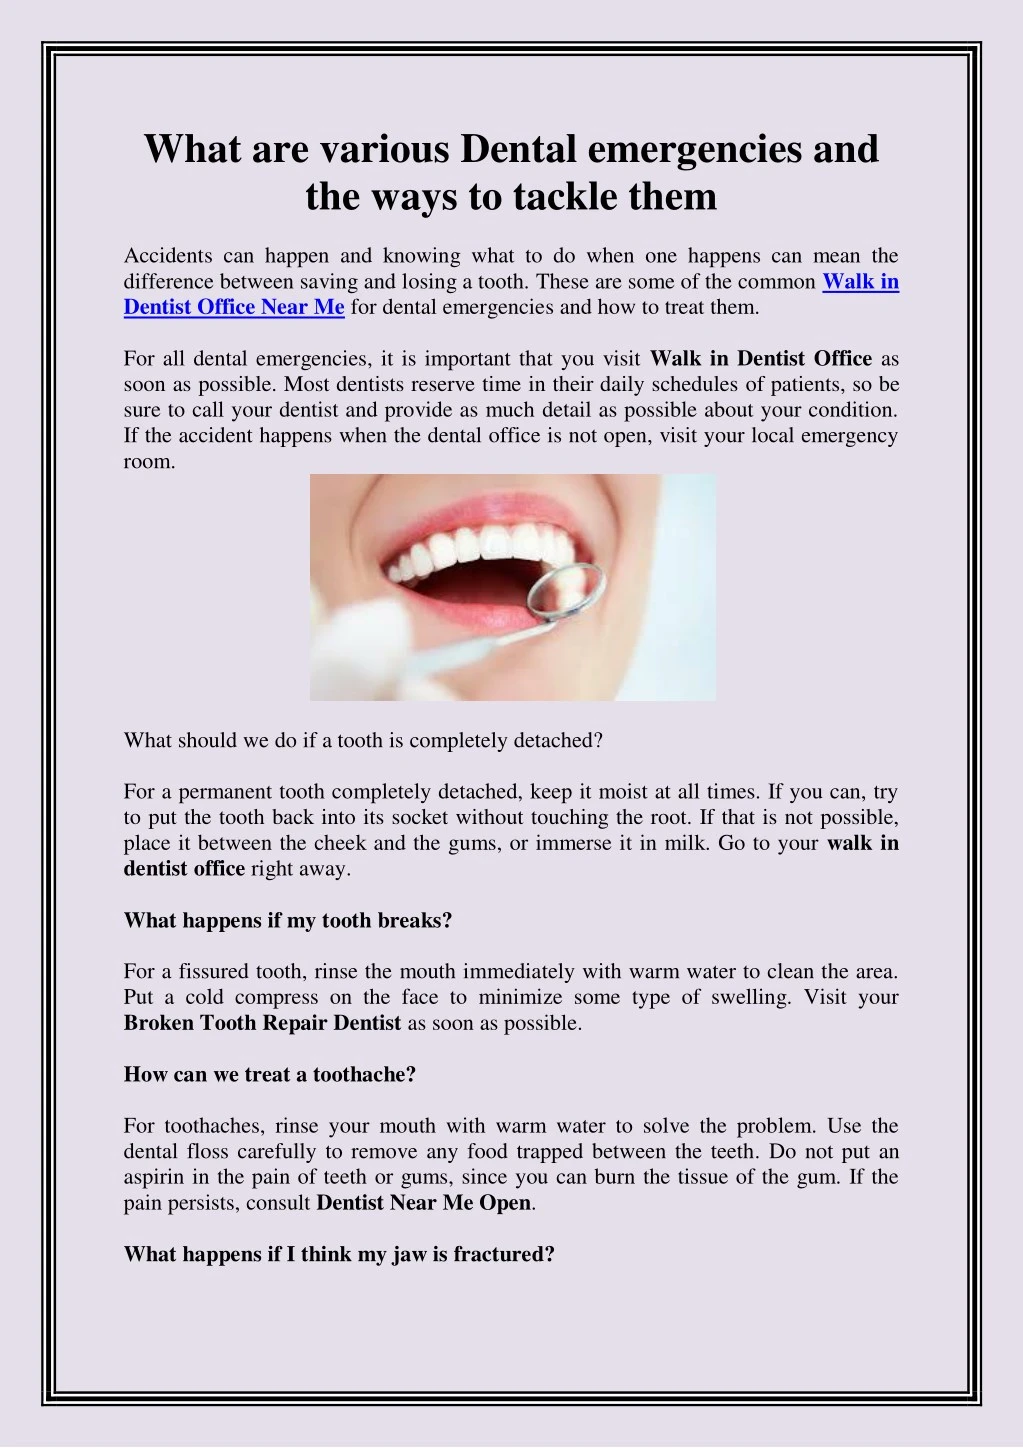 what are various dental emergencies and the ways